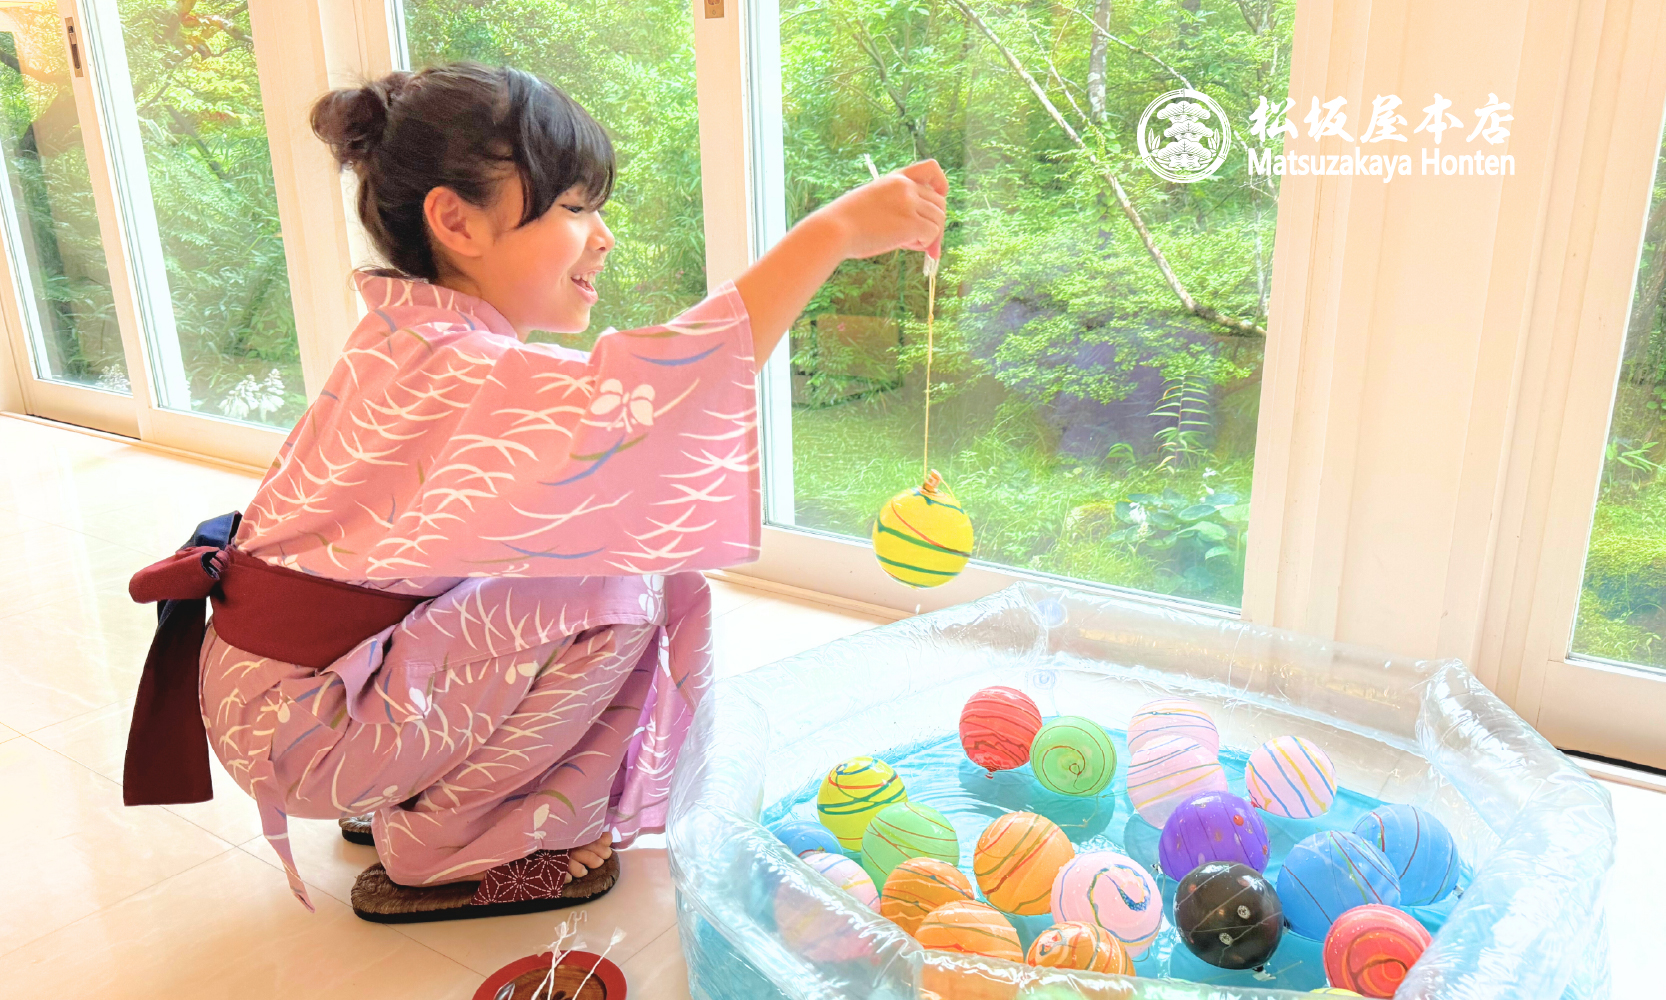 【Matsuzakaya Honten Summer Special】75% OFF for Kids, Free for Toddlers ~ Ramune and Fireworks Included ~